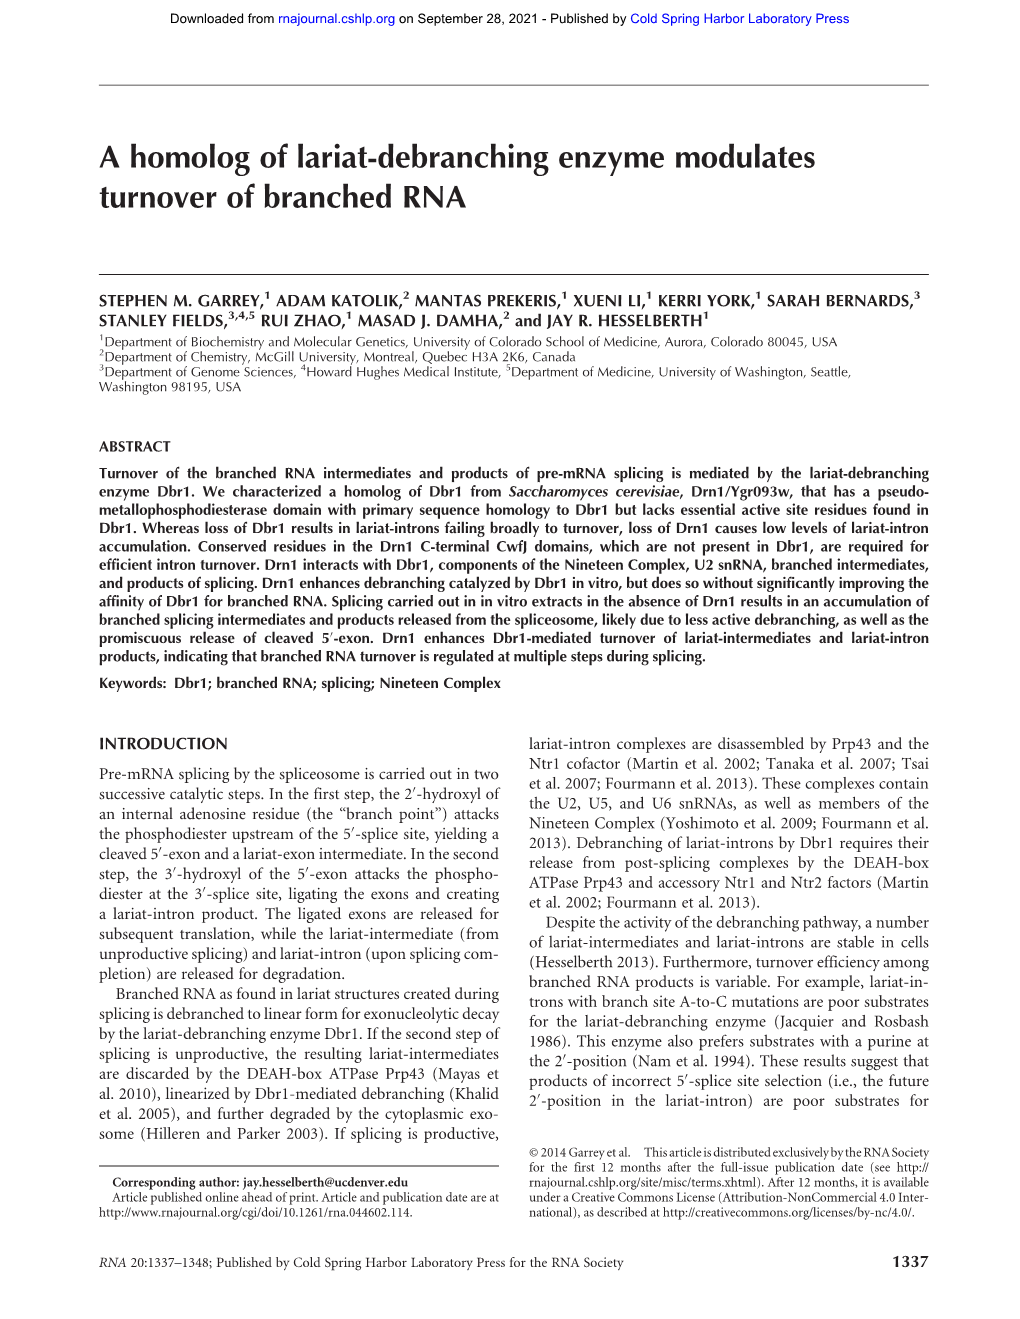 A Homolog of Lariat-Debranching Enzyme Modulates Turnover of Branched RNA